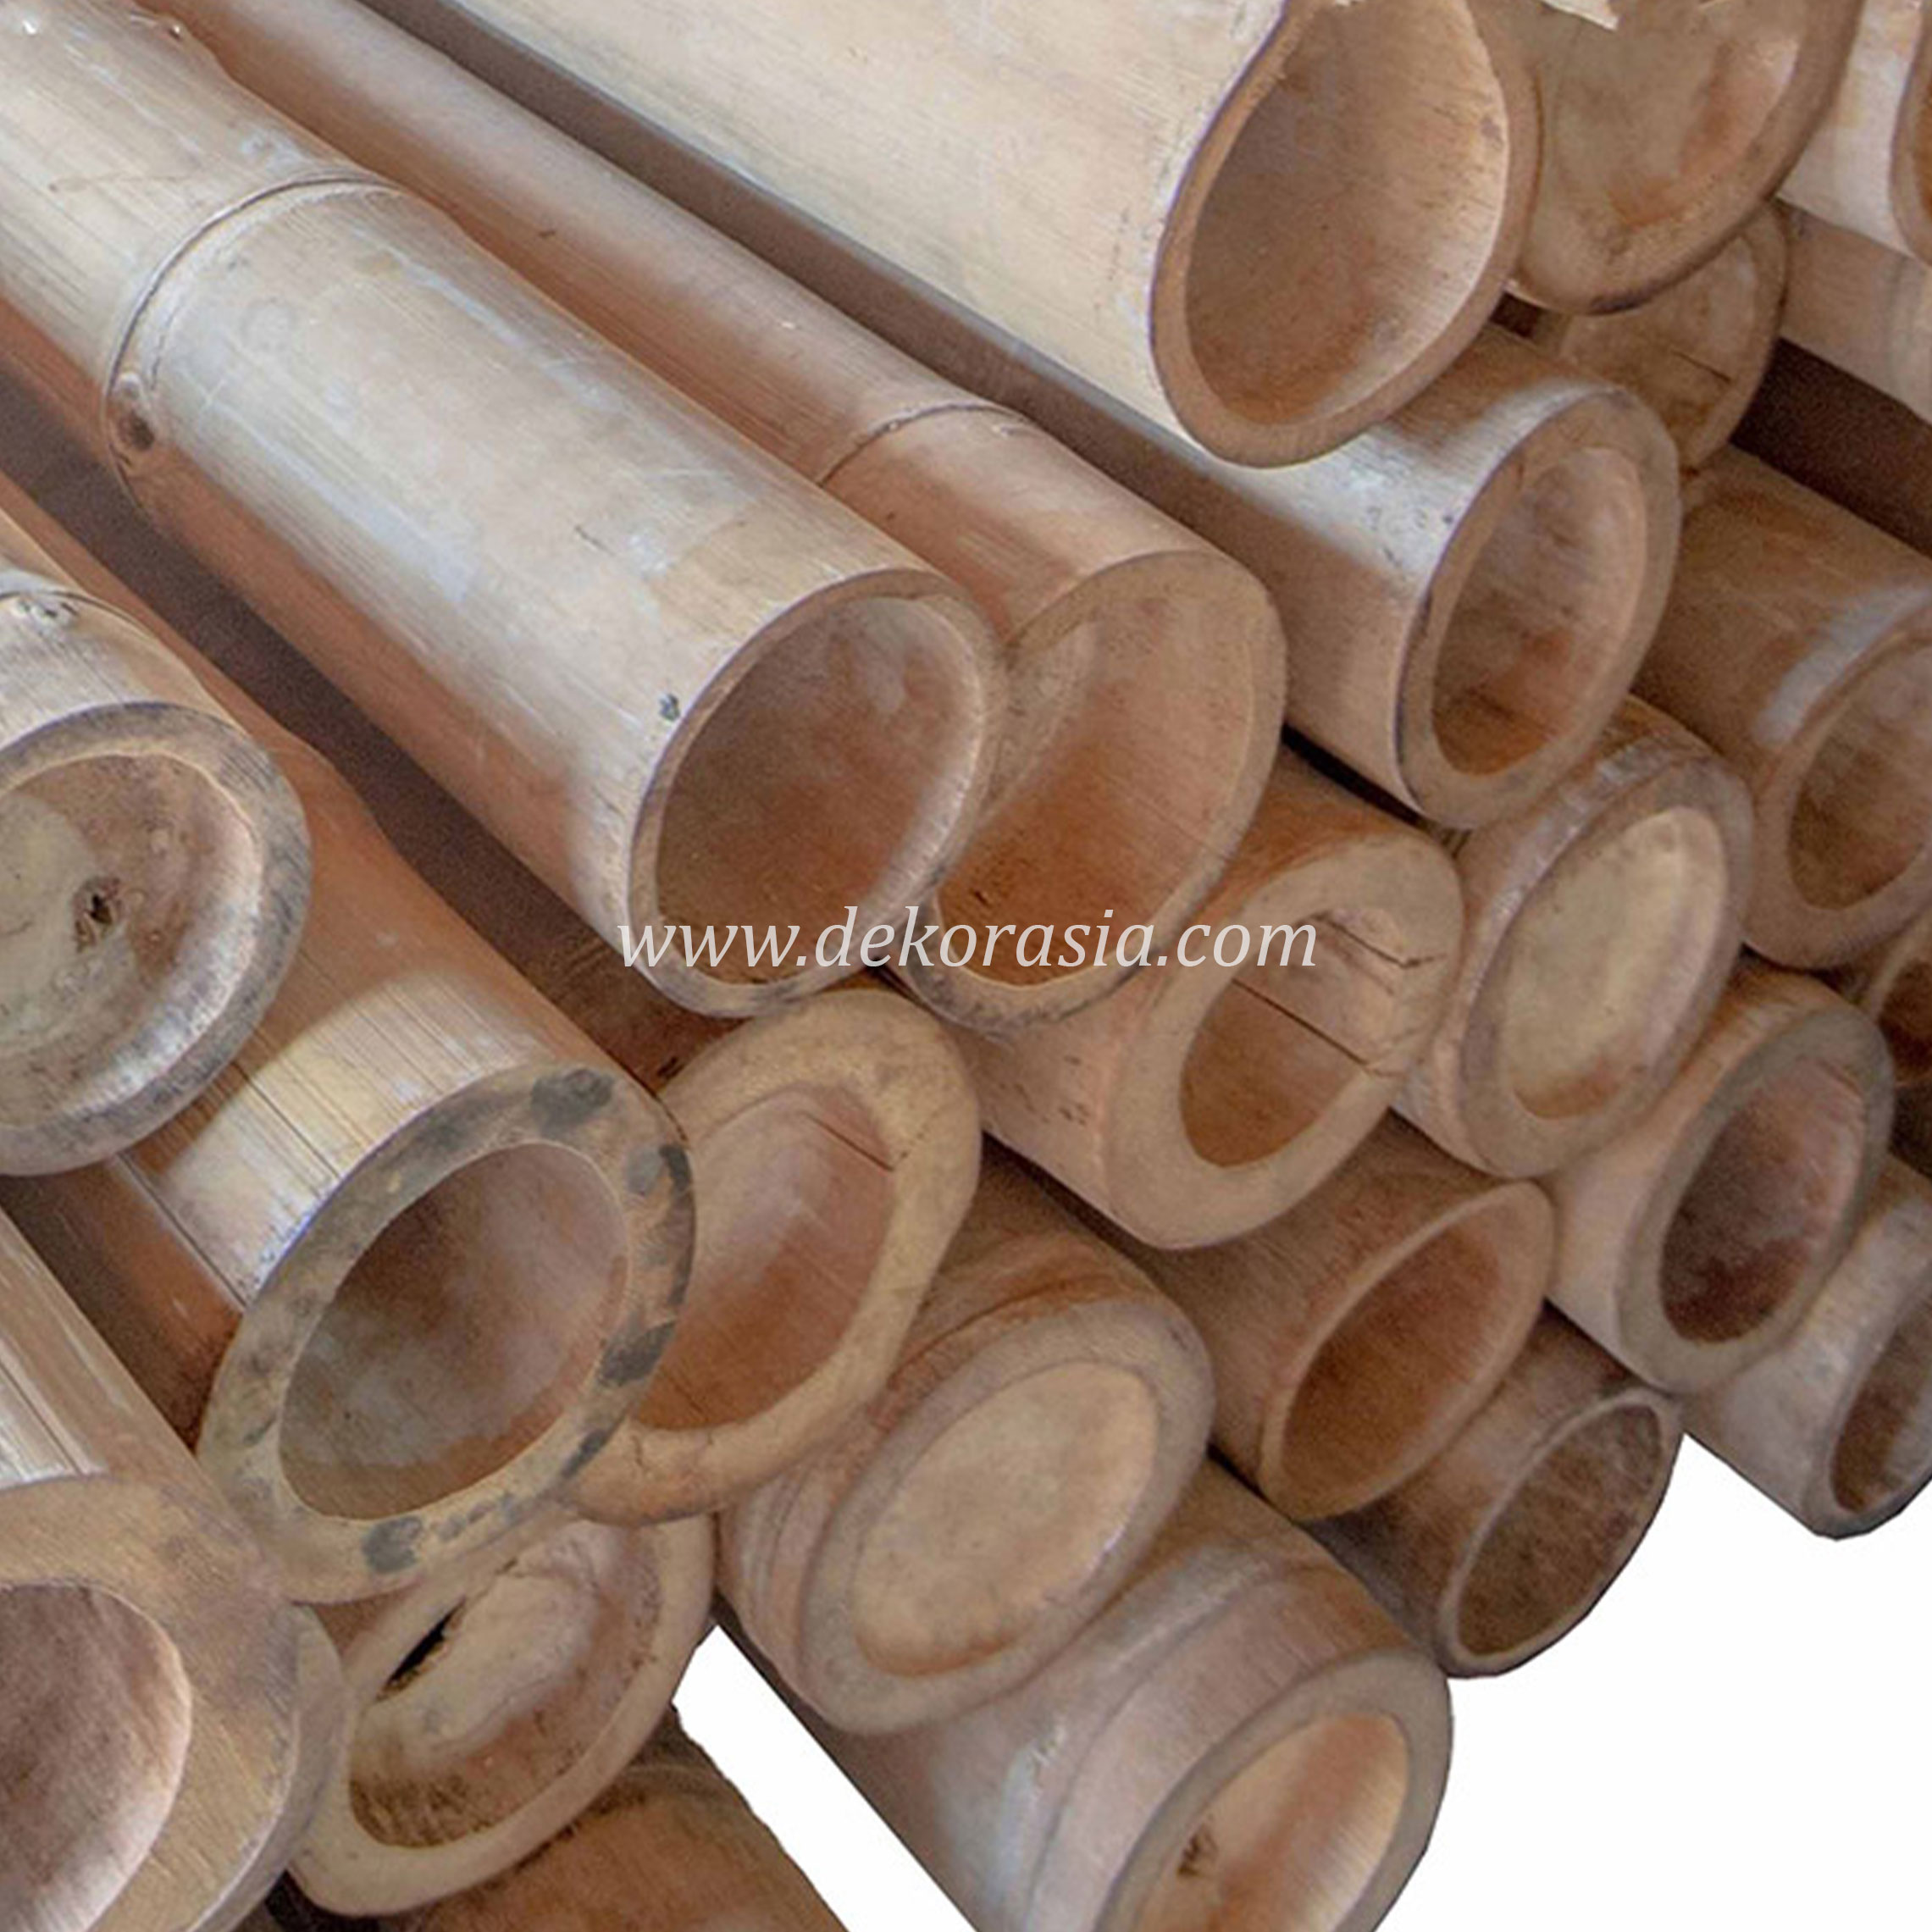 Bamboo Poles for Construction and Home Decor